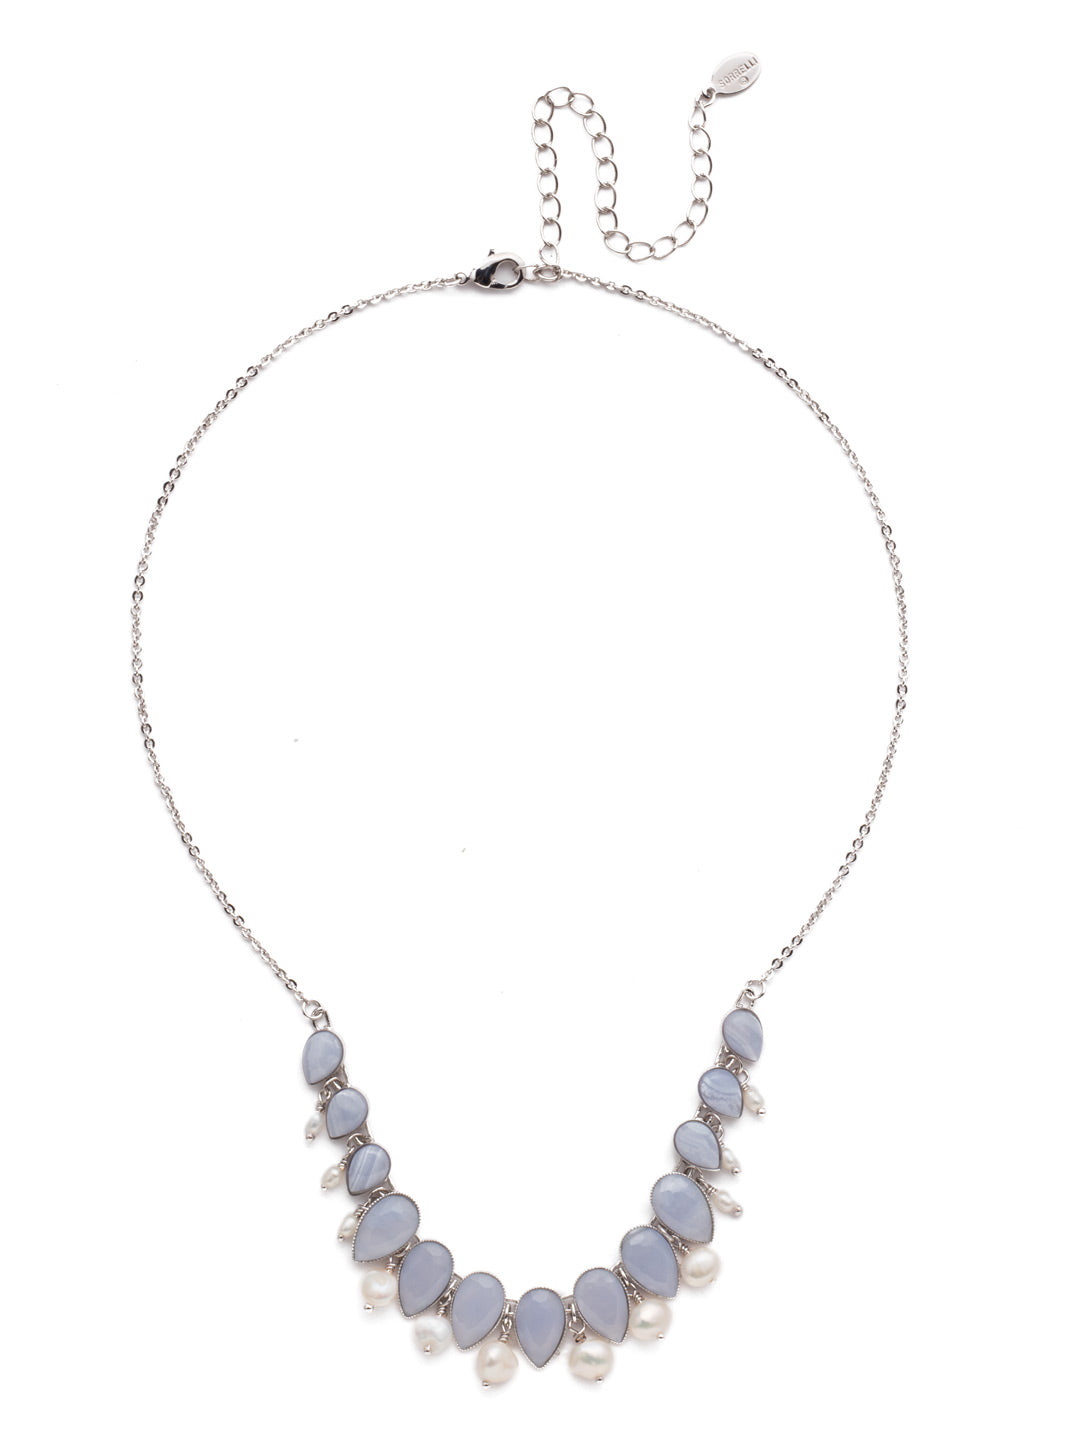 Lenora Statement Necklace - NEQ3RHTUL - <p>The Lenora Statement Necklace is a sophisticated stand-out. On-trend teardrop-shaped stones dripping with assorted freshwater pearls, it doesn't get any classier. From Sorrelli's Tulip collection in our Palladium Silver-tone finish.</p>